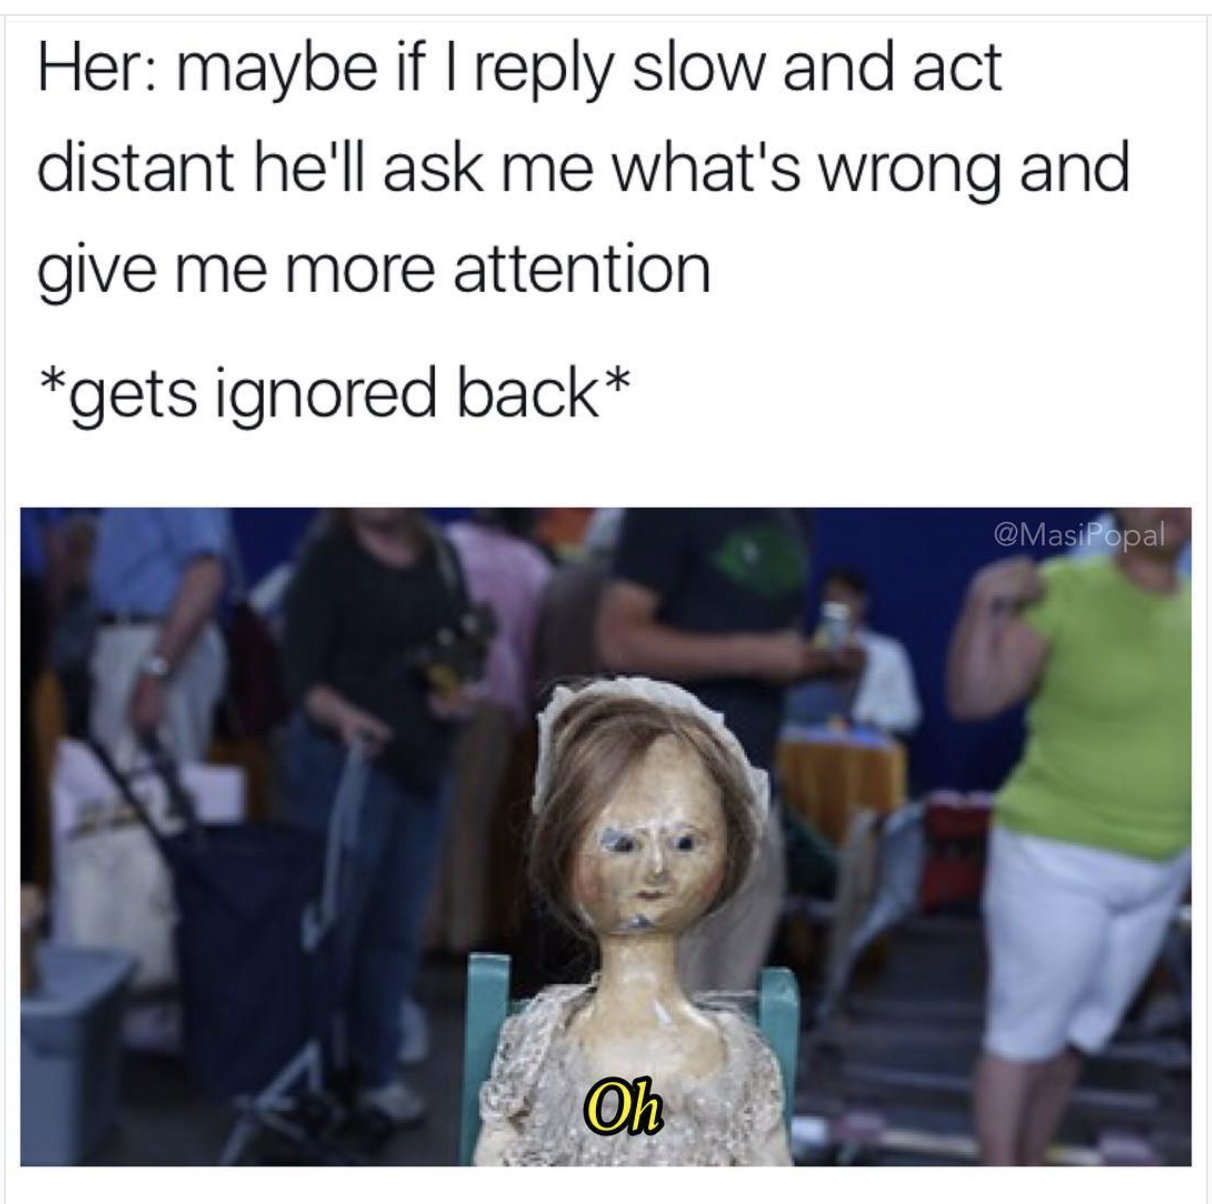 meme about when the girl thinks ignoring him will work